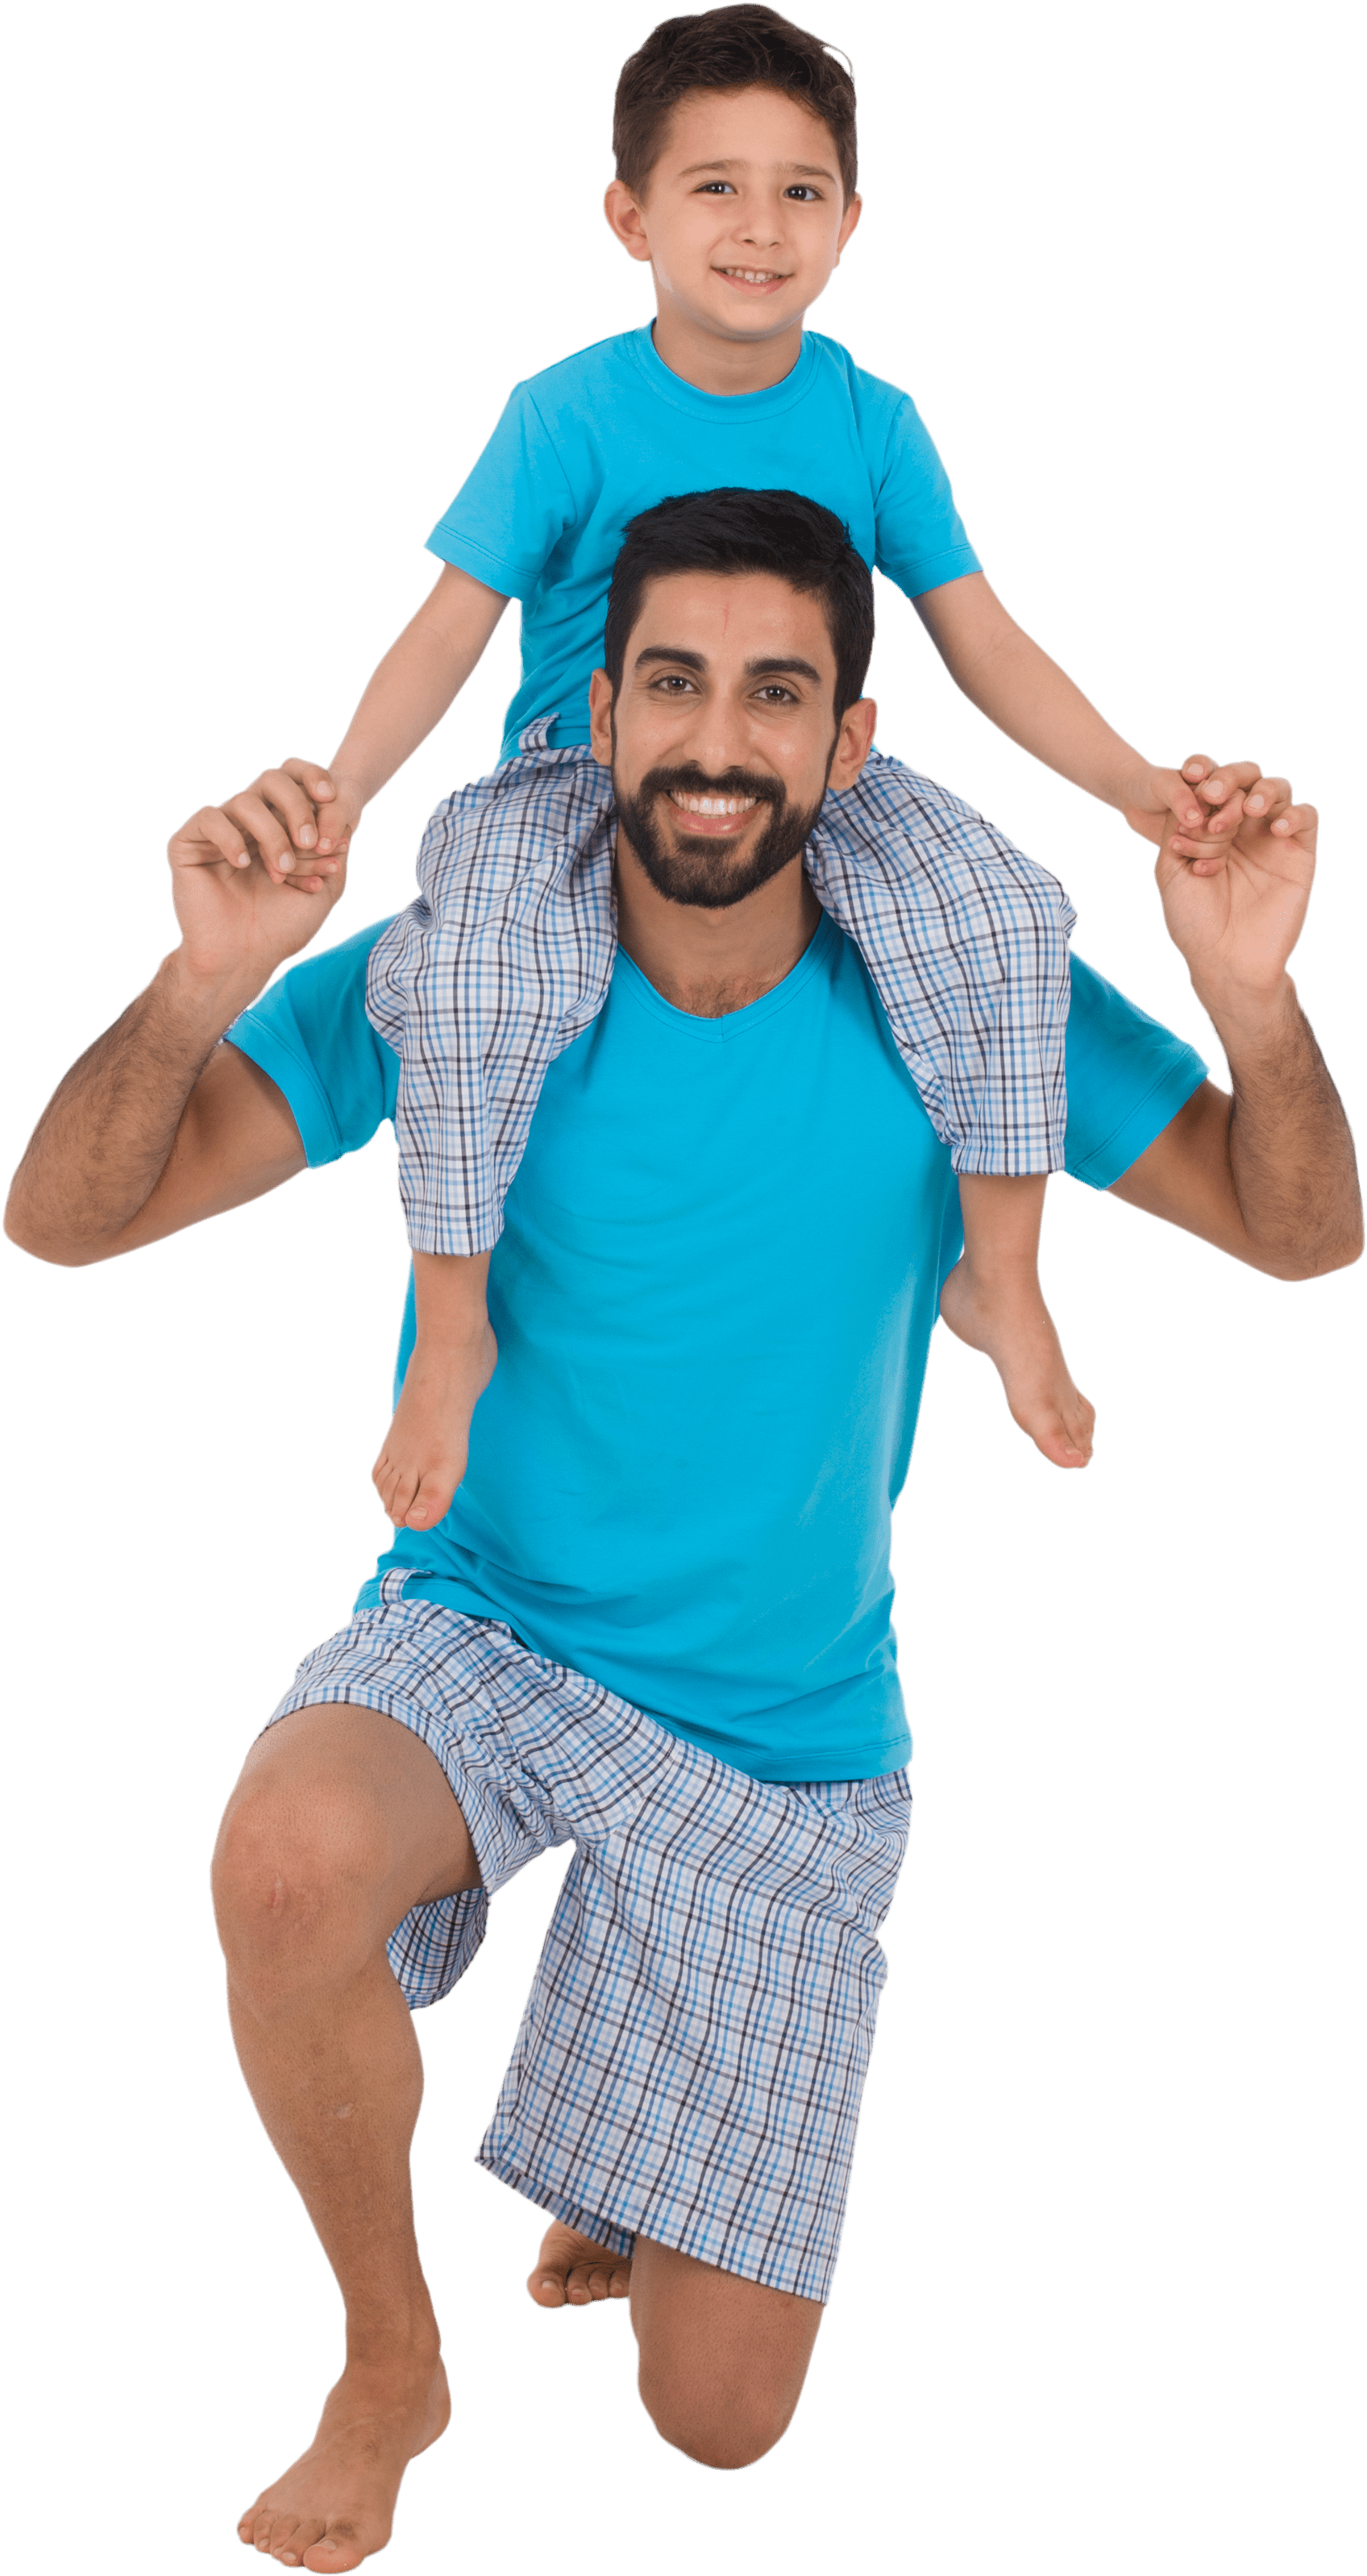 A Man Carrying A Child On His Shoulders